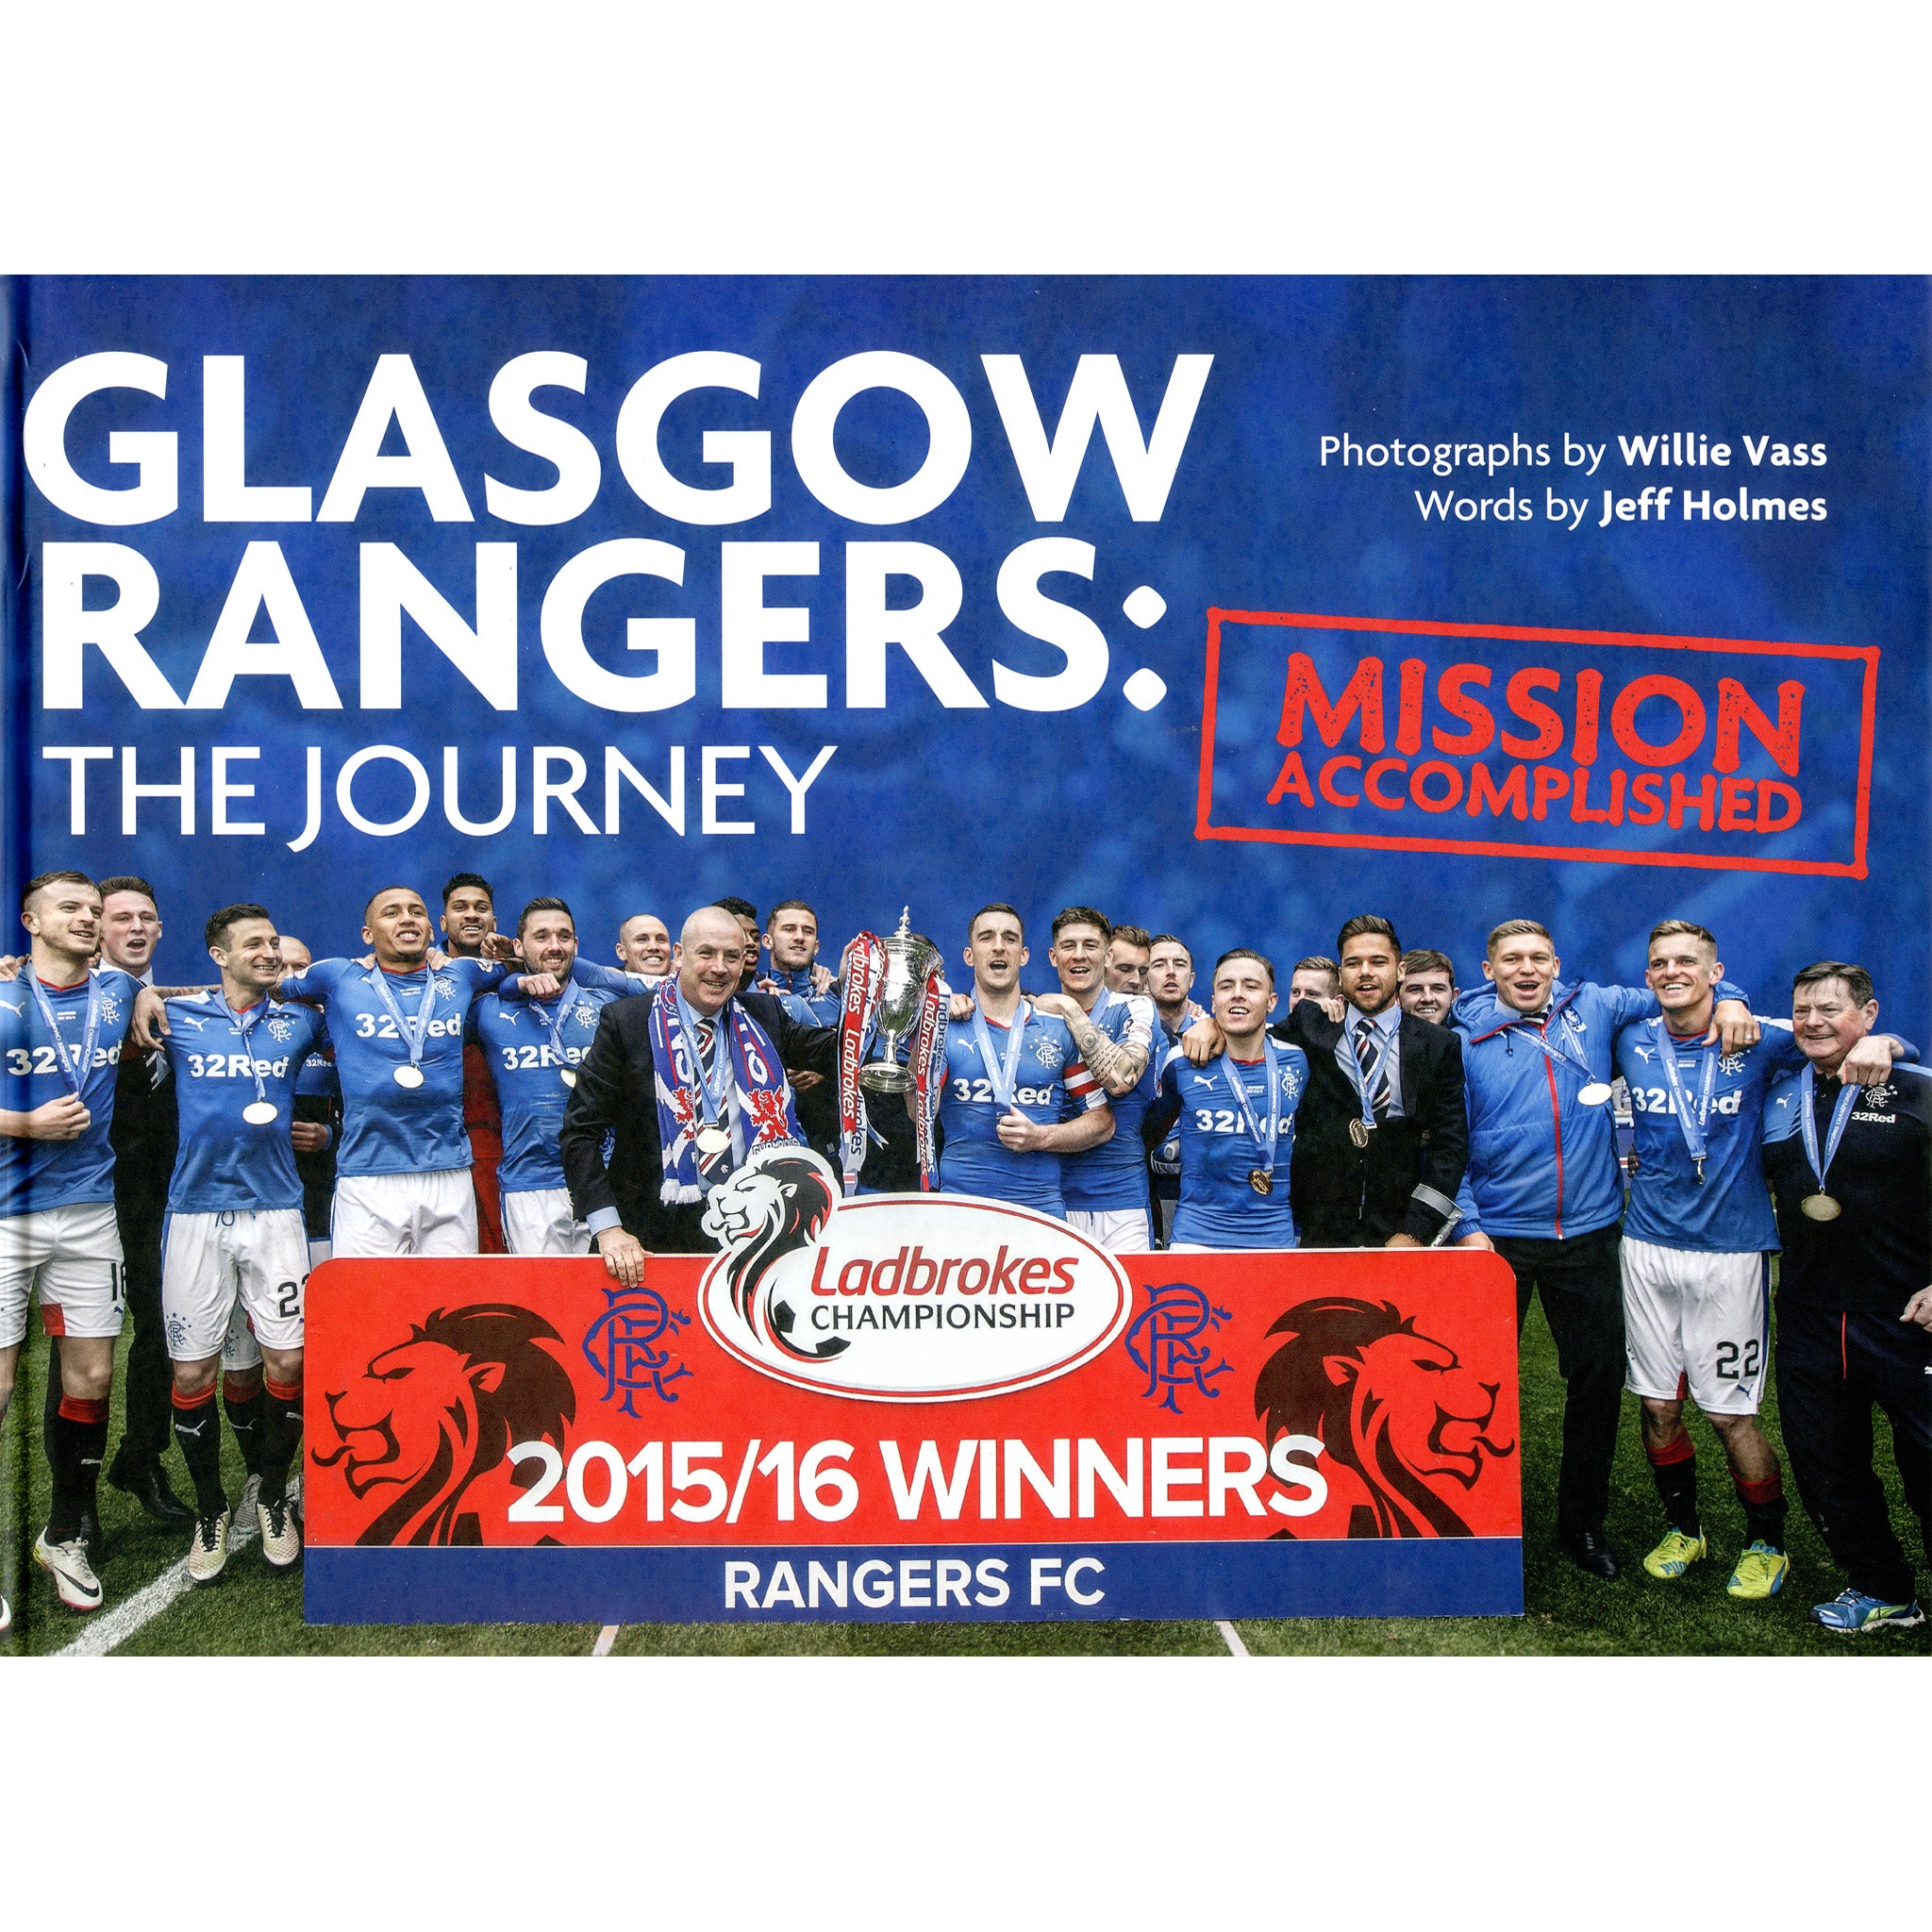 Glasgow Rangers: The Journey – 2015/16 Winners – Mission Accomplished